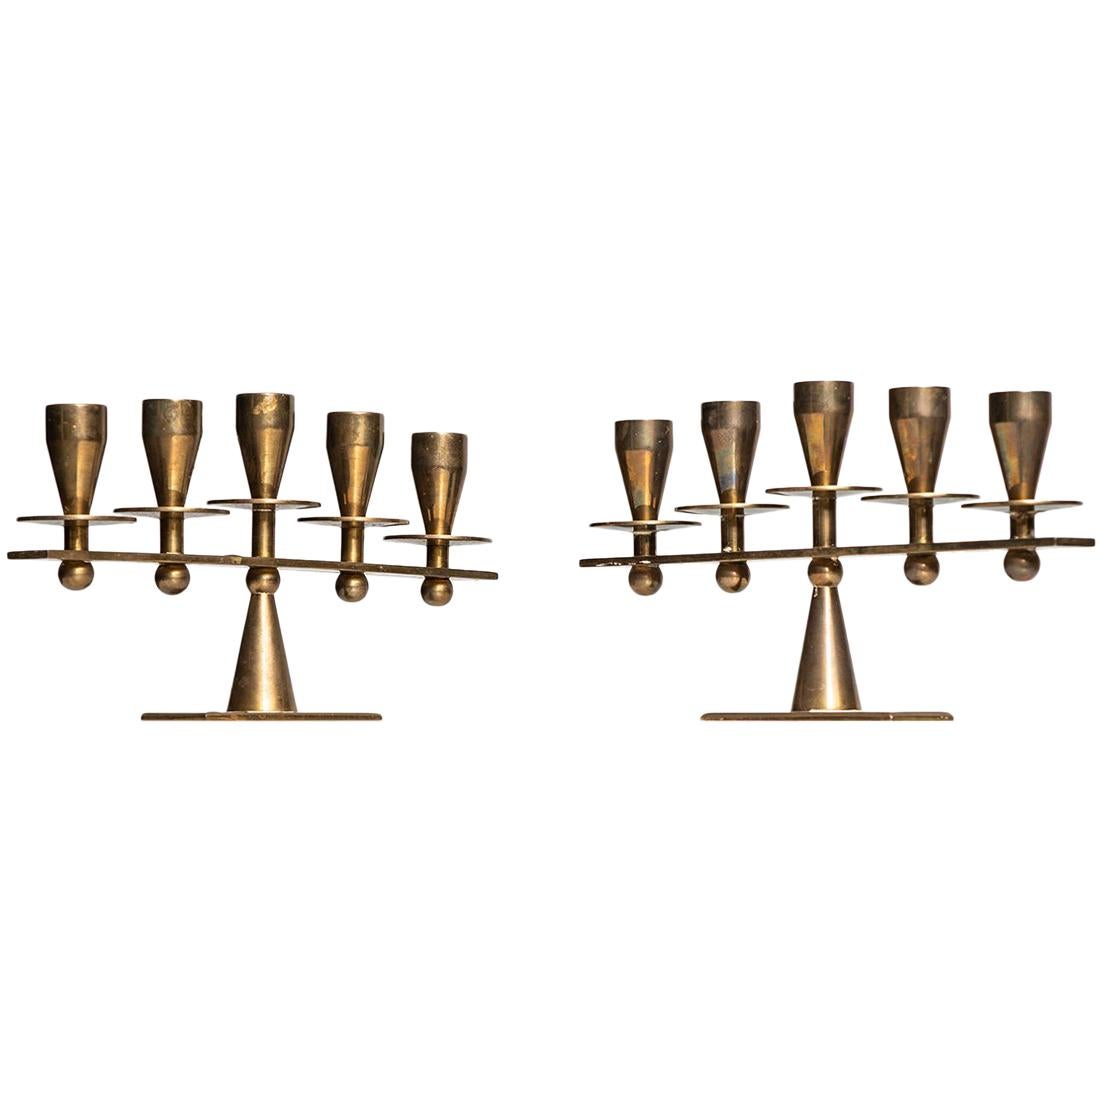 Pair of Heavy Candlesticks in Brass Produced by Kara in Denmark